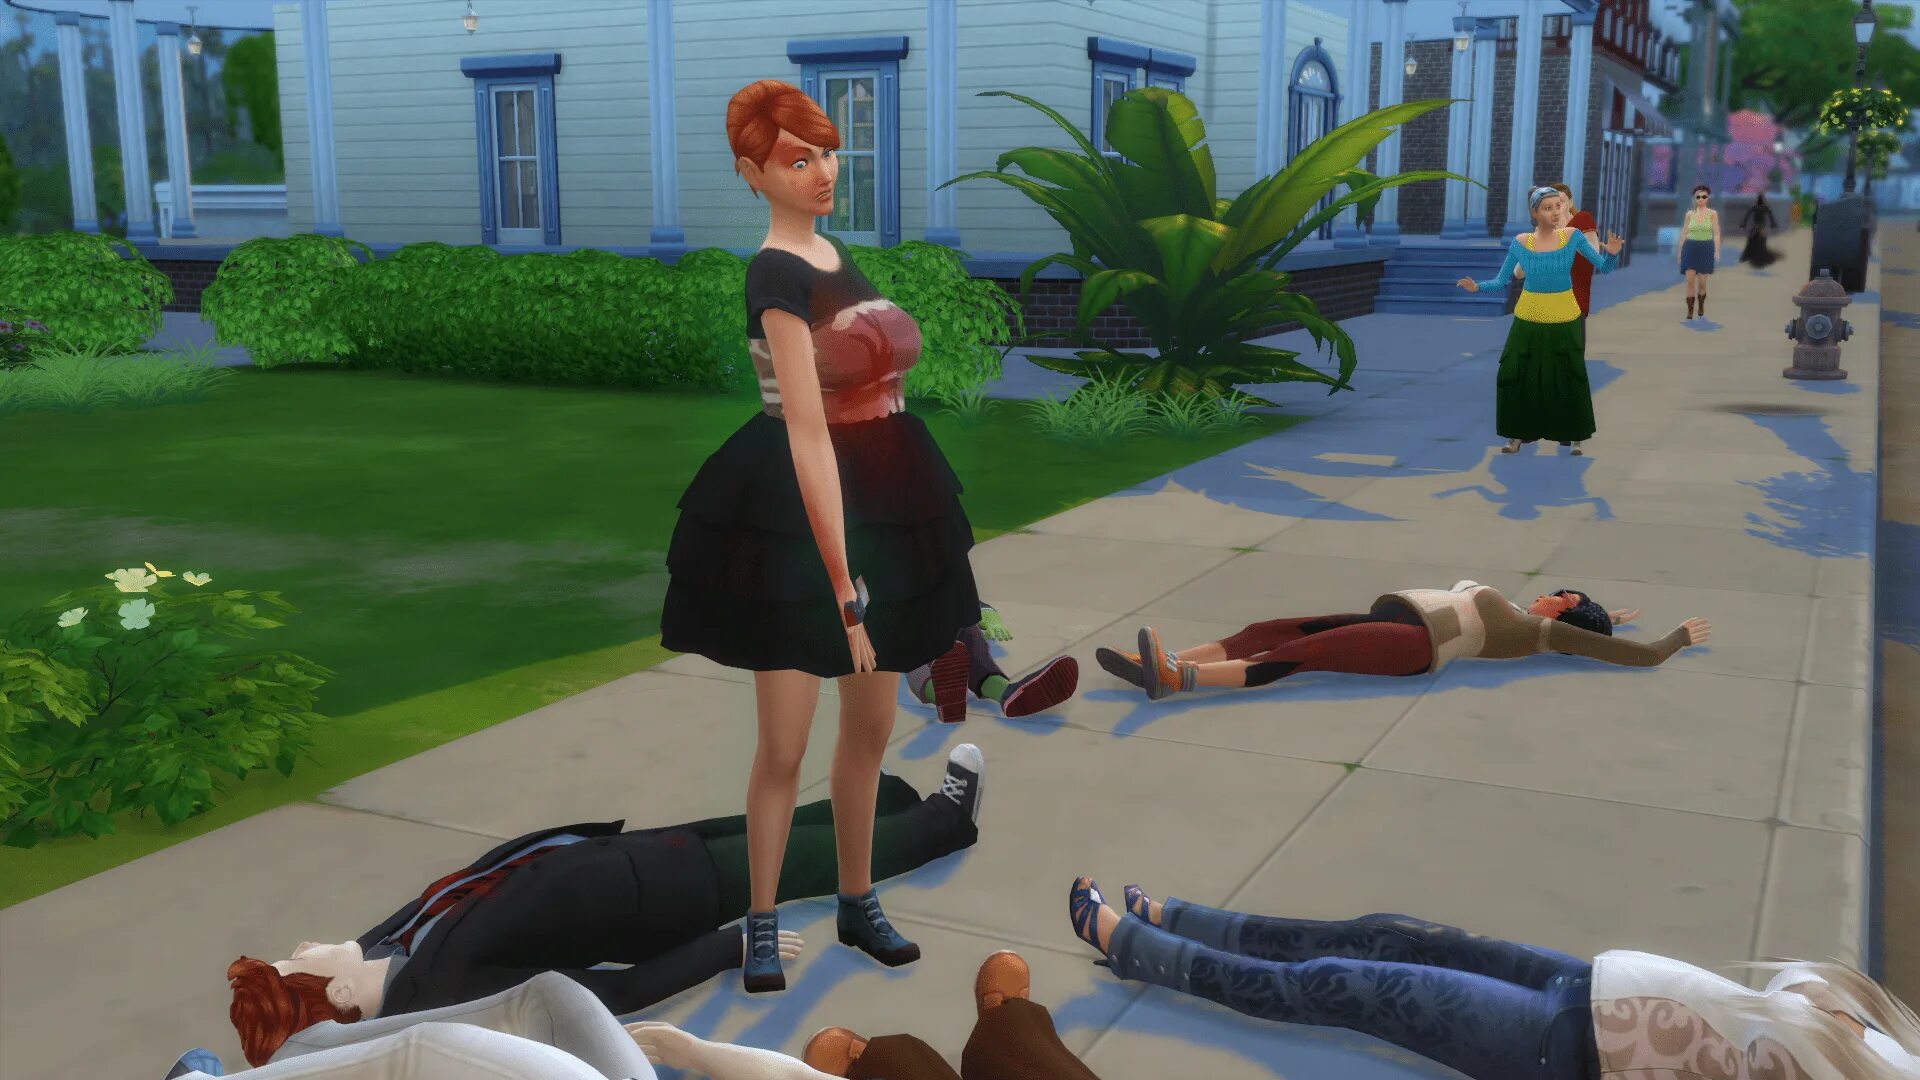 Whickedwhims русский. SIMS 4 Murder. The SIMS 5 мода. SIMS 4 violence мод.